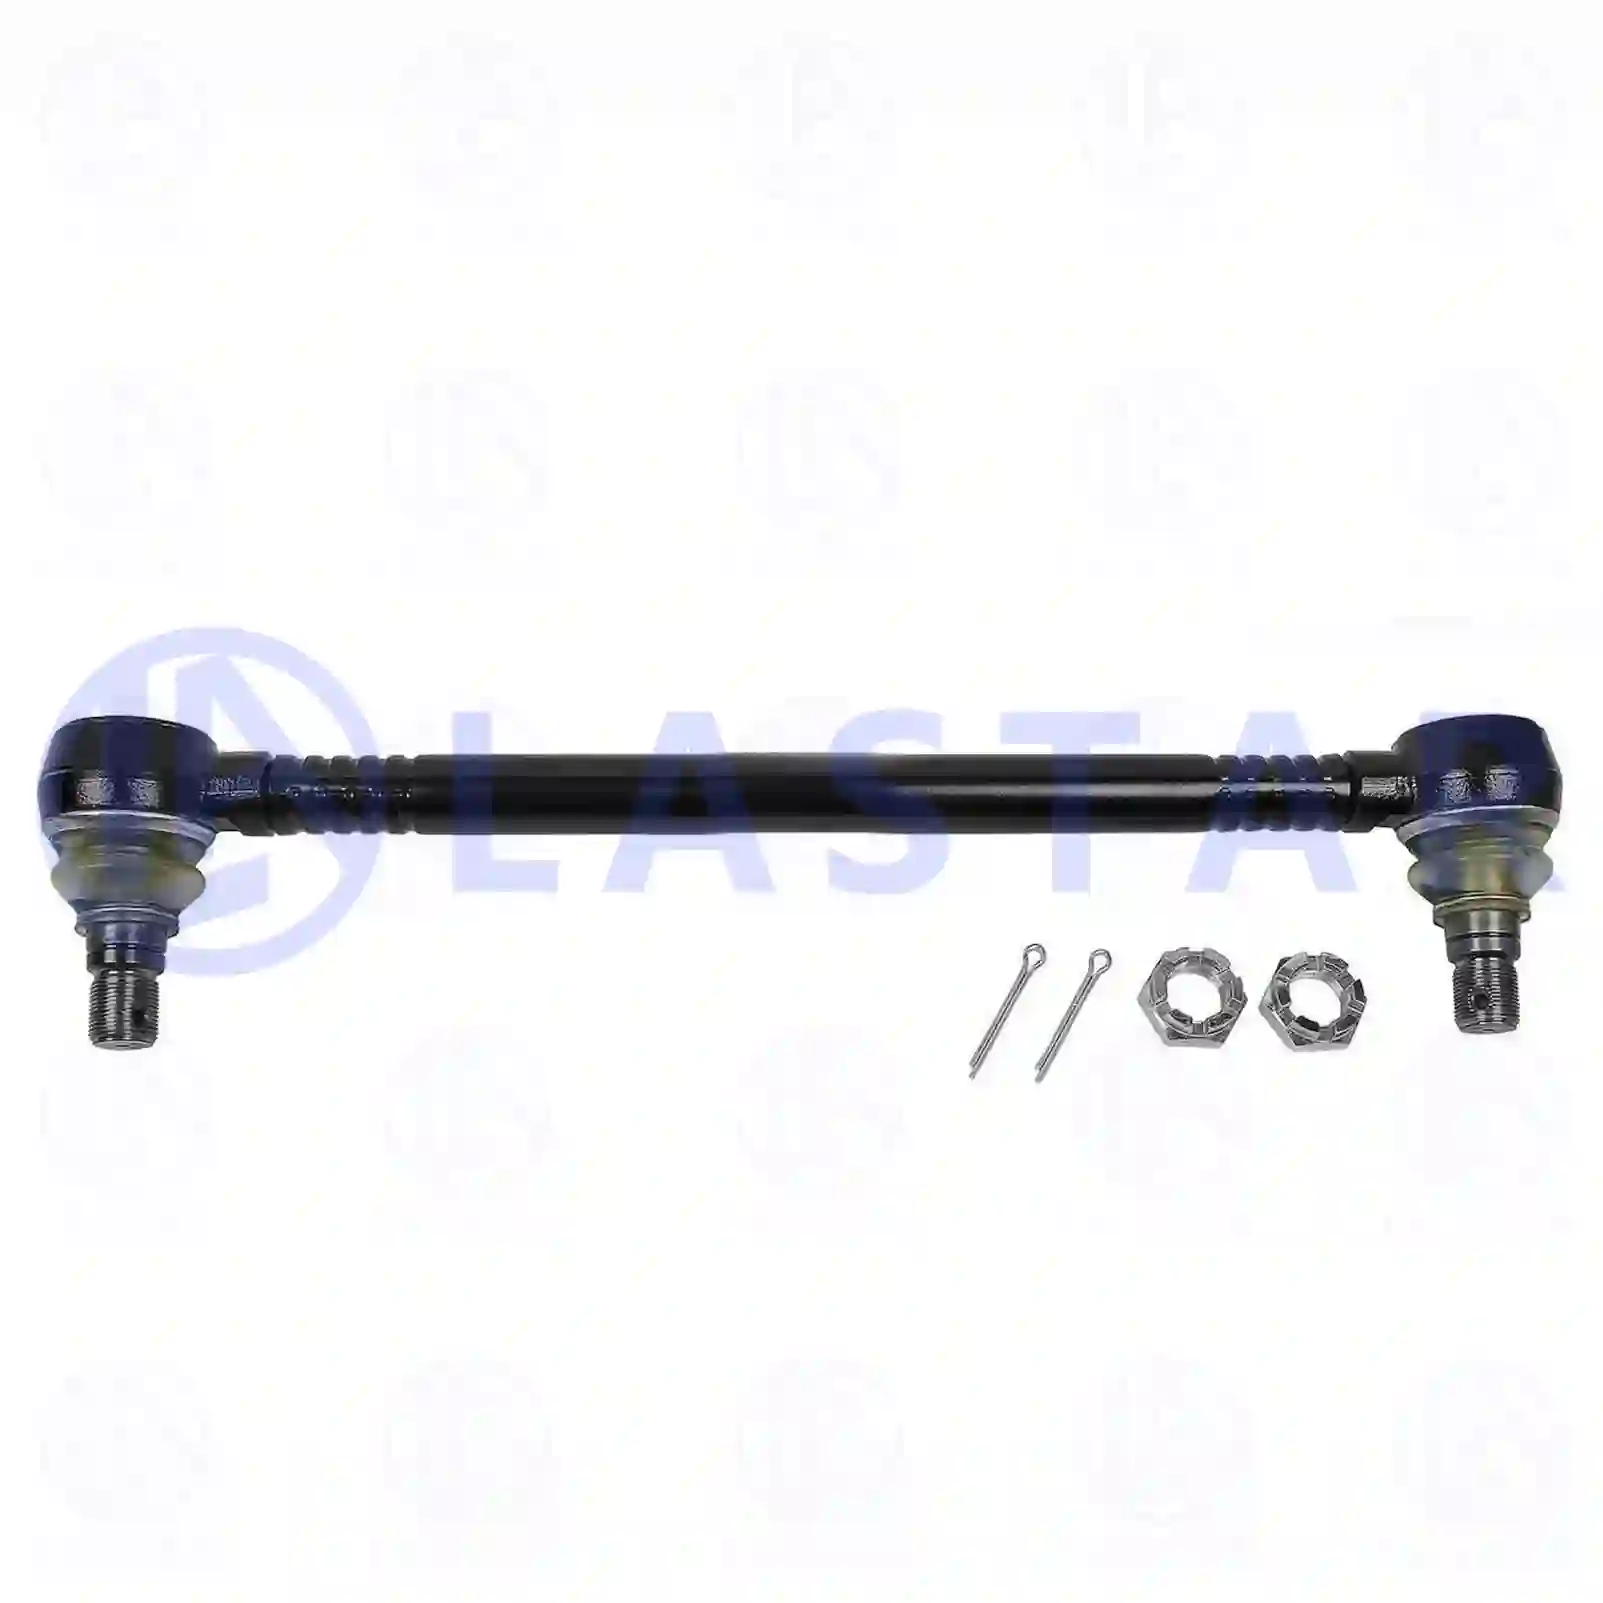 Track rod, 77730285, 3563300103, 6133300103, , , ||  77730285 Lastar Spare Part | Truck Spare Parts, Auotomotive Spare Parts Track rod, 77730285, 3563300103, 6133300103, , , ||  77730285 Lastar Spare Part | Truck Spare Parts, Auotomotive Spare Parts